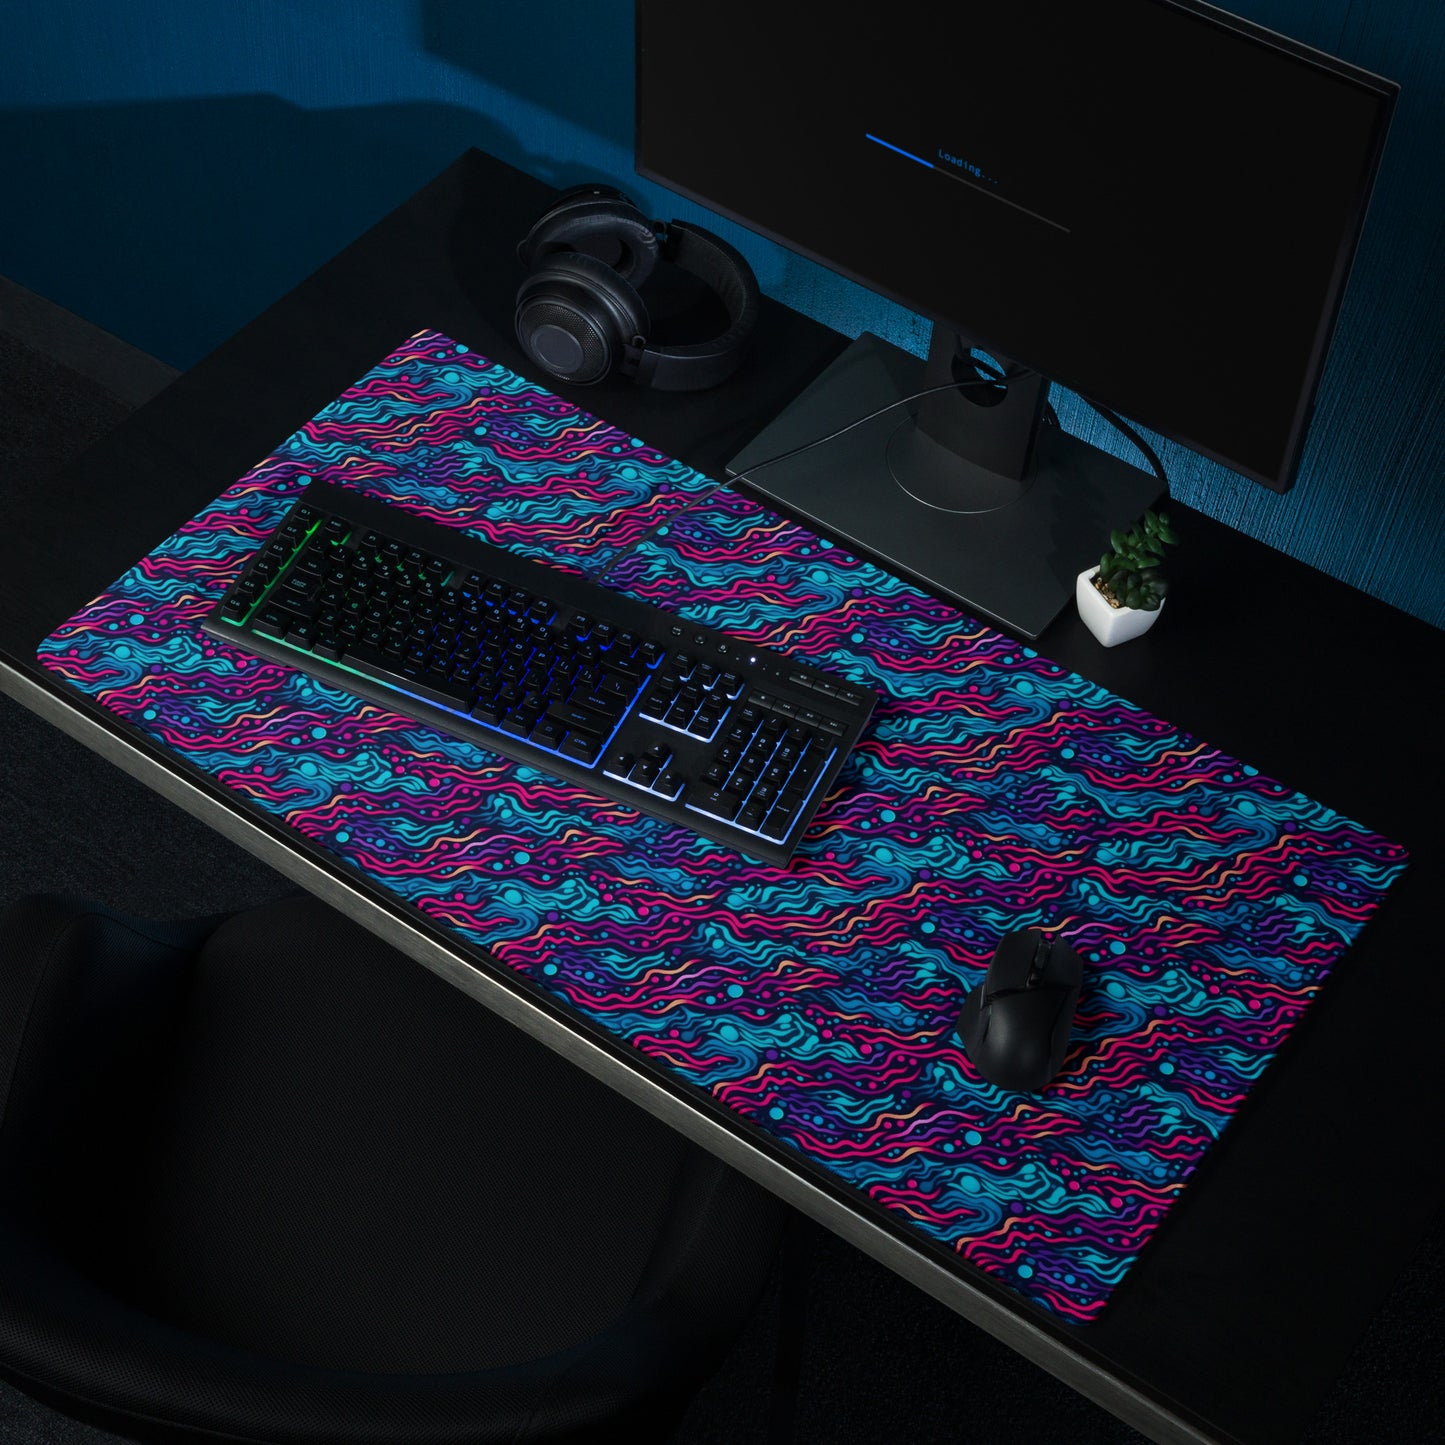 A 36" x 18" desk pad with wavy blue and pink pattern sitting on a desk.